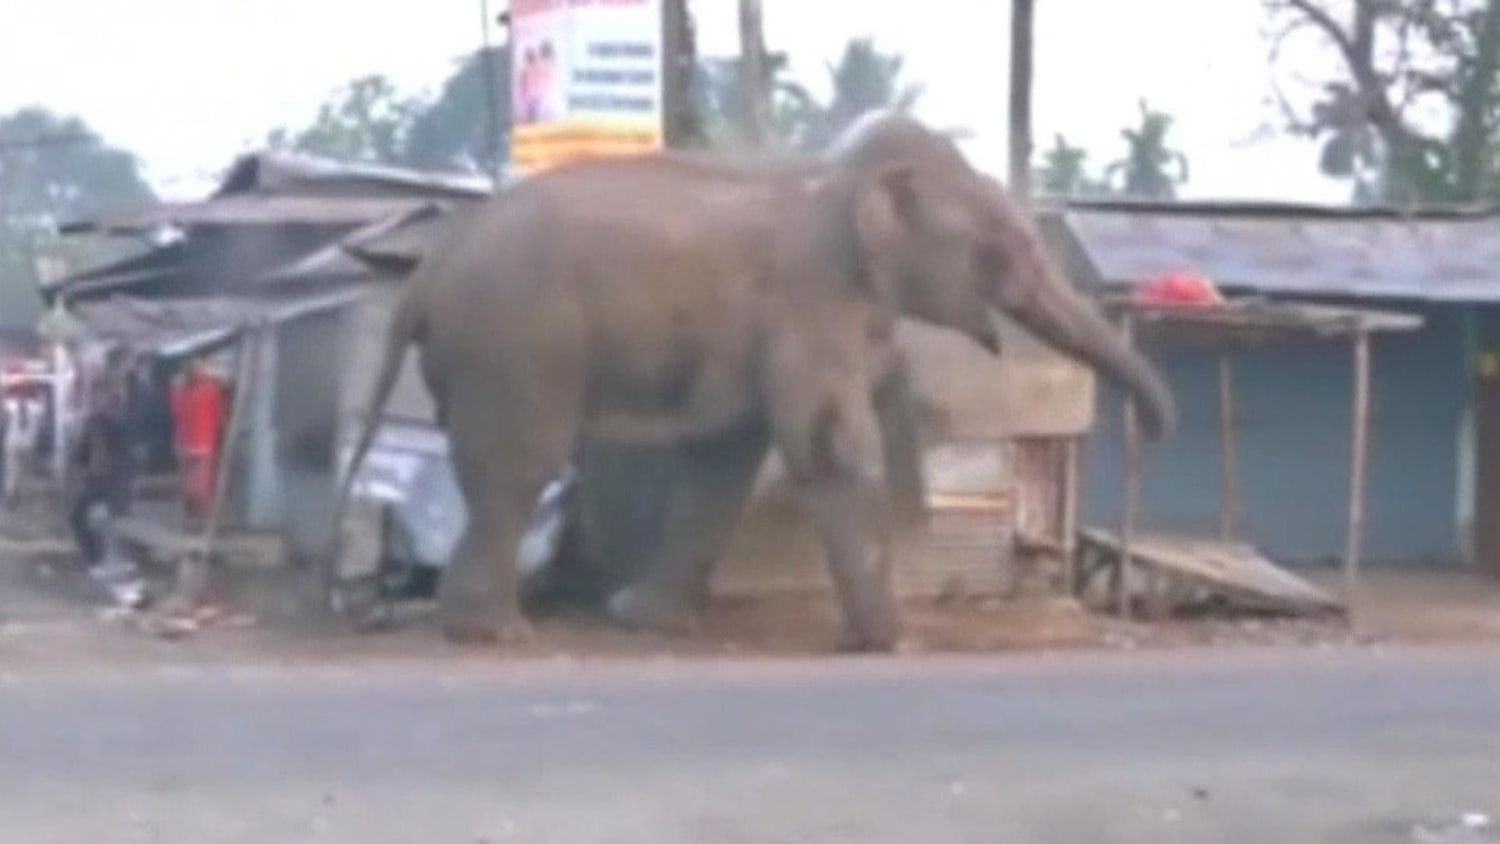 Video: Elephant goes on rampage, smashing homes in Indian town